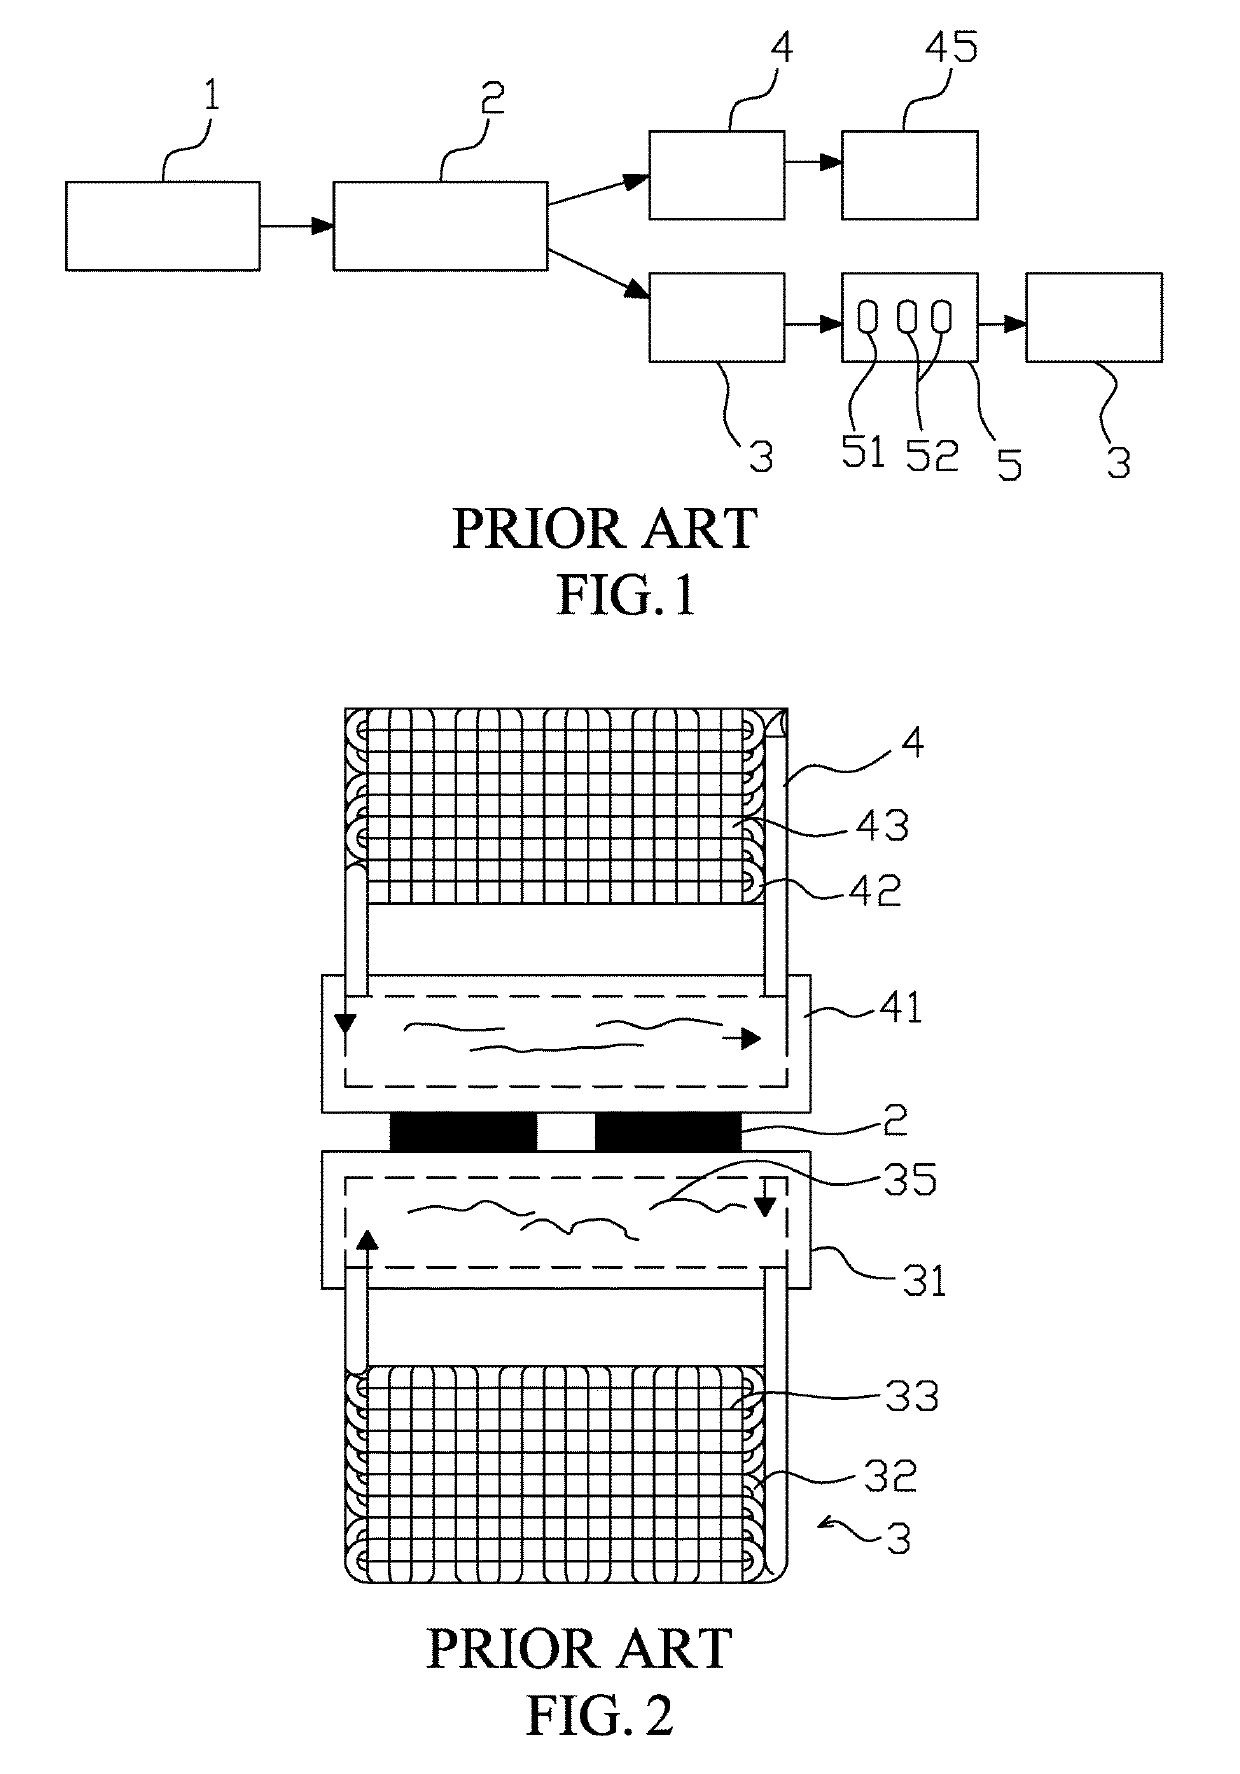 Semiconductor-based air conditioning device